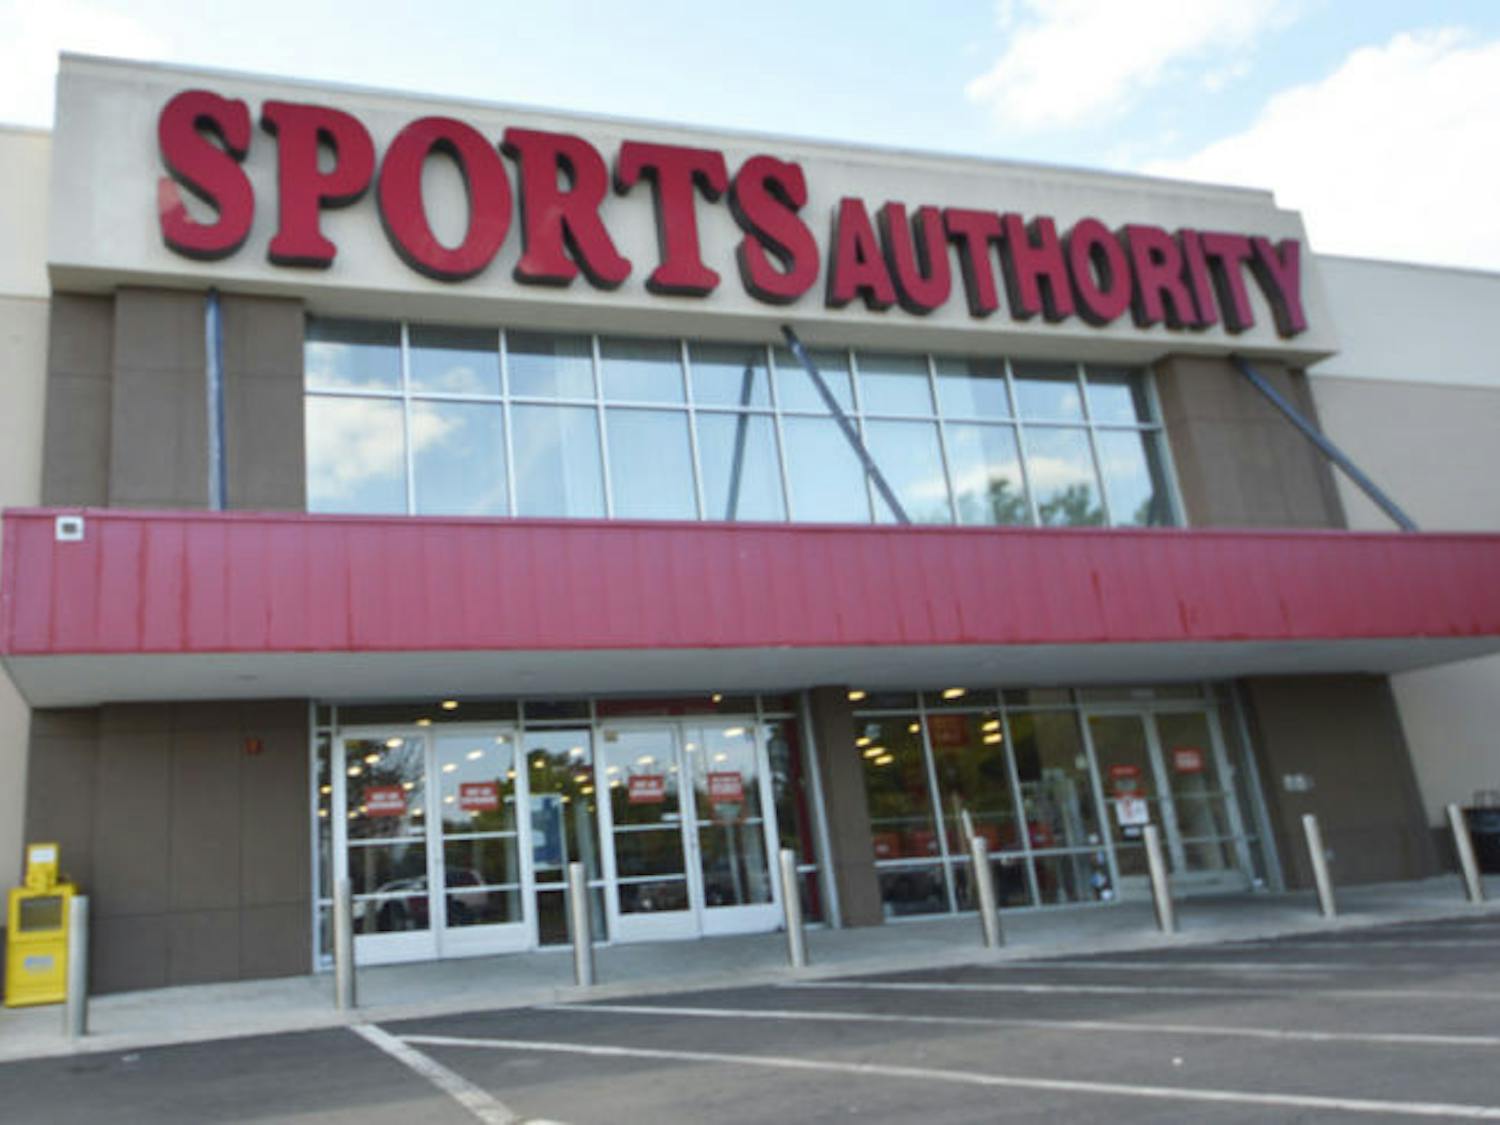 Sports Authority, located at 400 W. Newberry Road, held its grand reopening Saturday after two months of remodeling. The goal of the remodel was to have a more open floor plan.